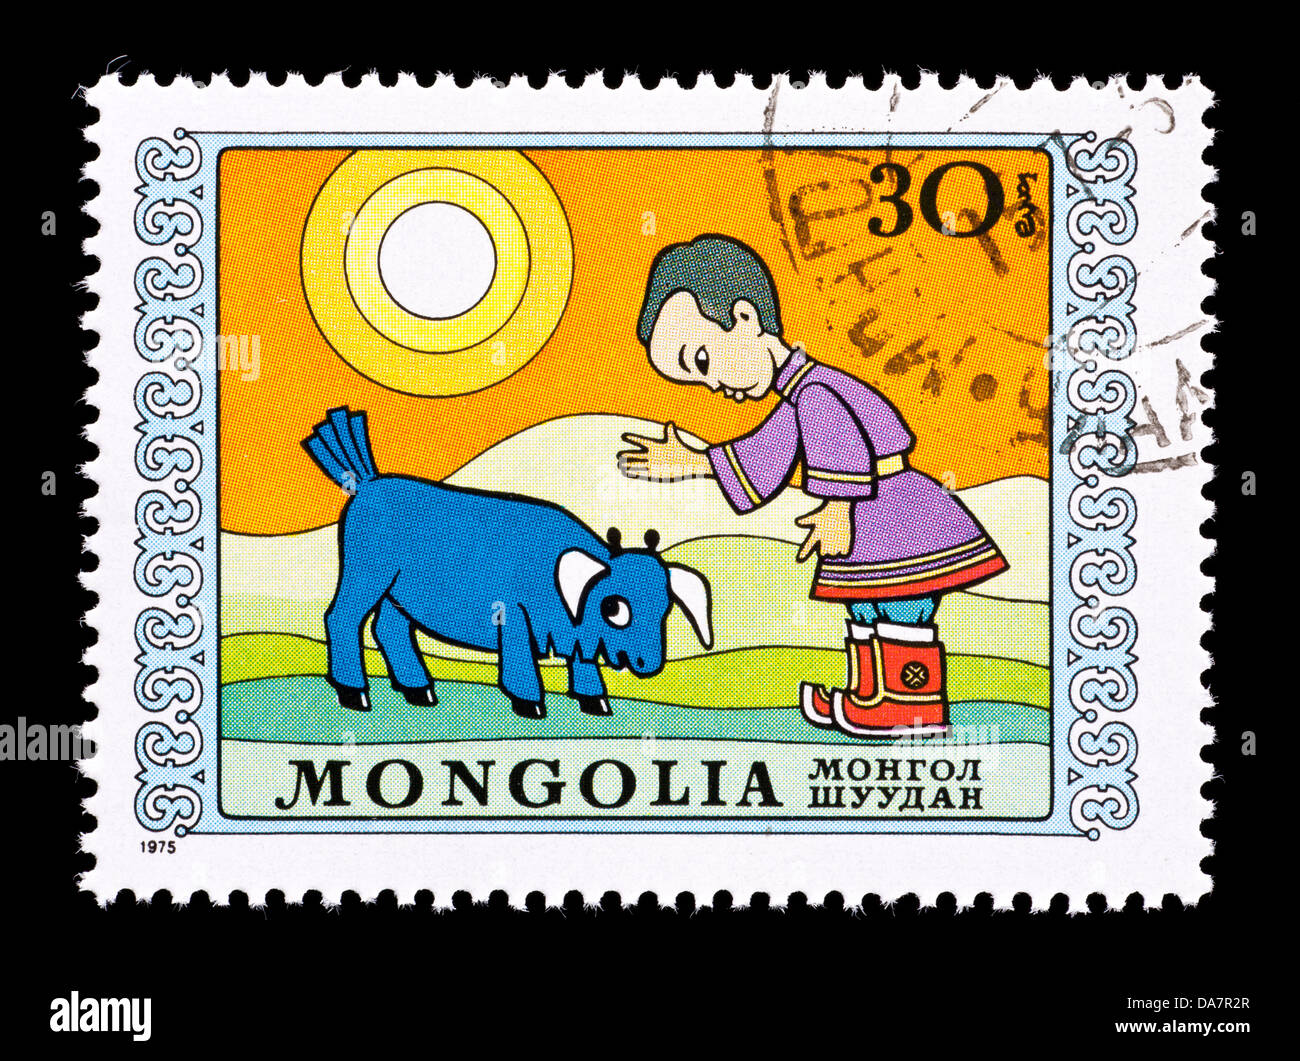 Postage stamp from Mongolia depicting a boy and a disobedient bull calf. Stock Photo